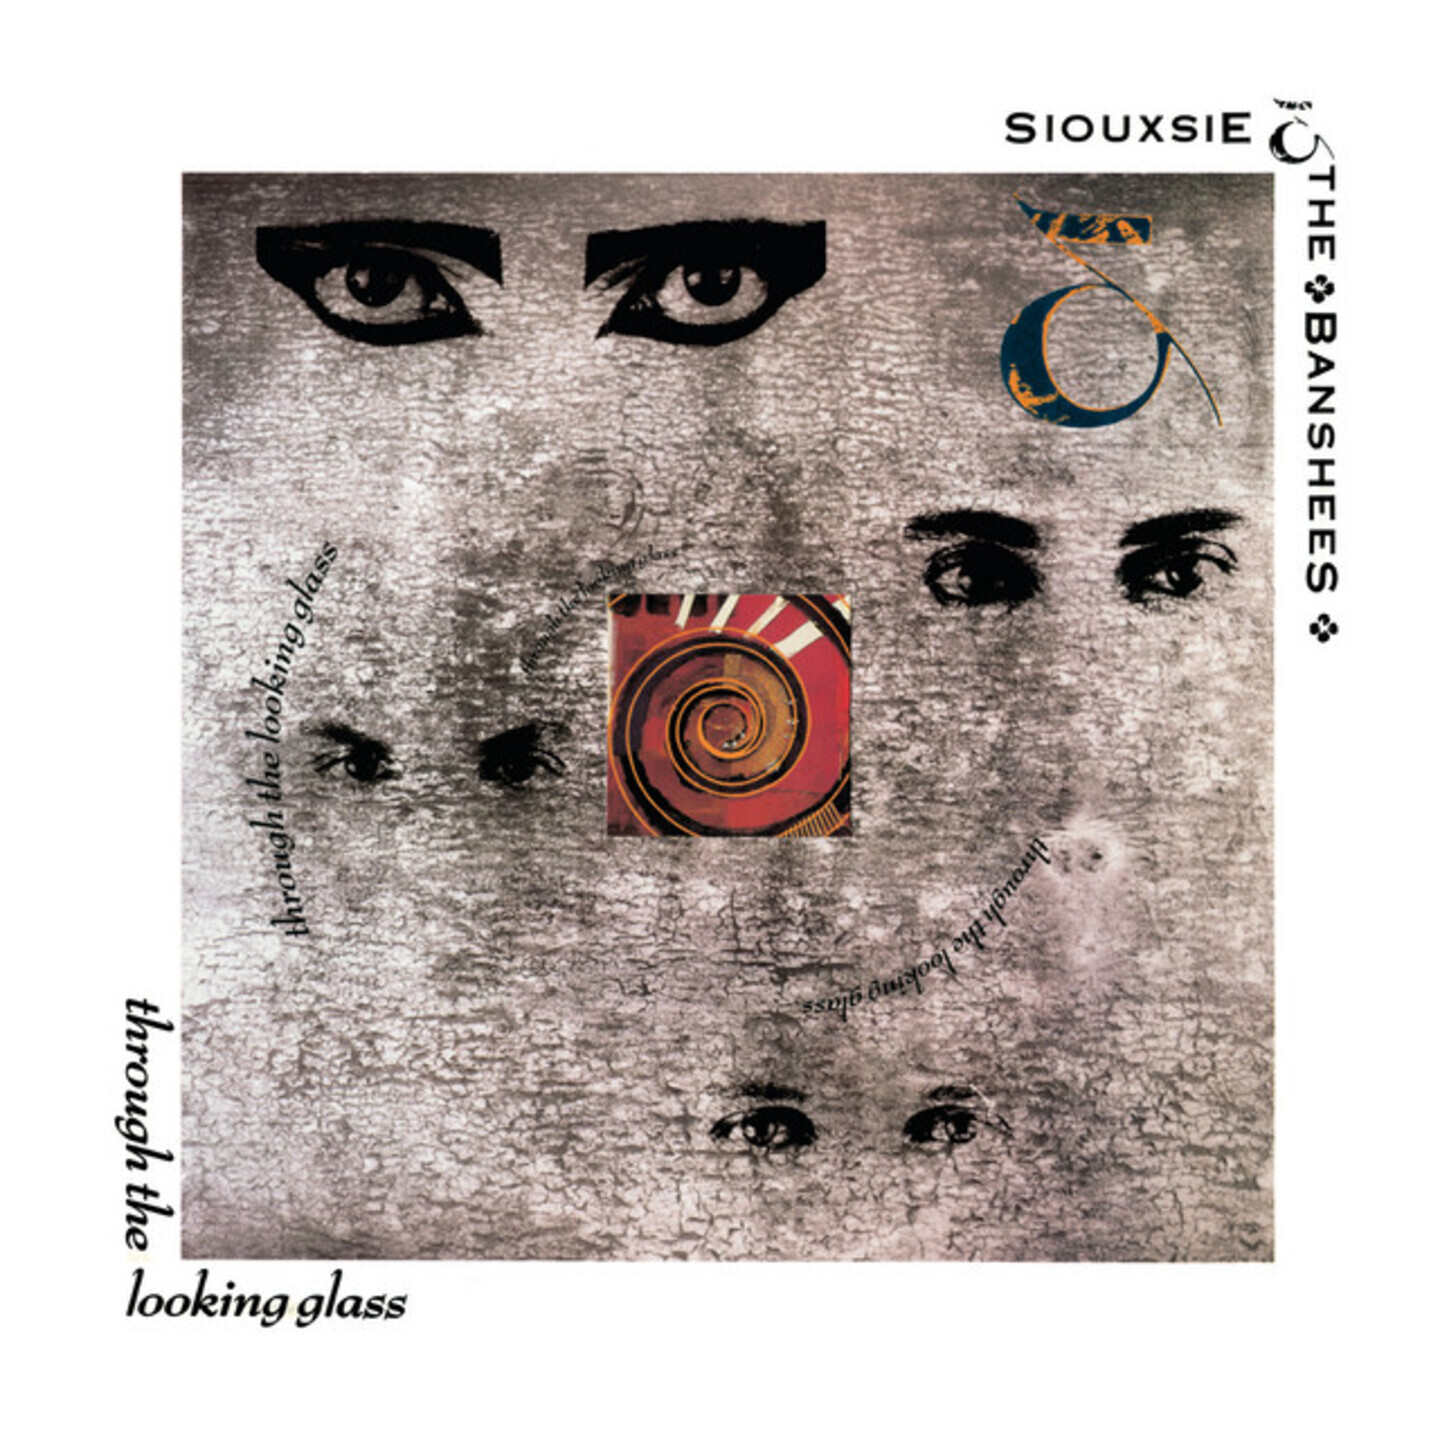 SIOUXSIE AND THE BANSHEES - Through The Looking Glass LP